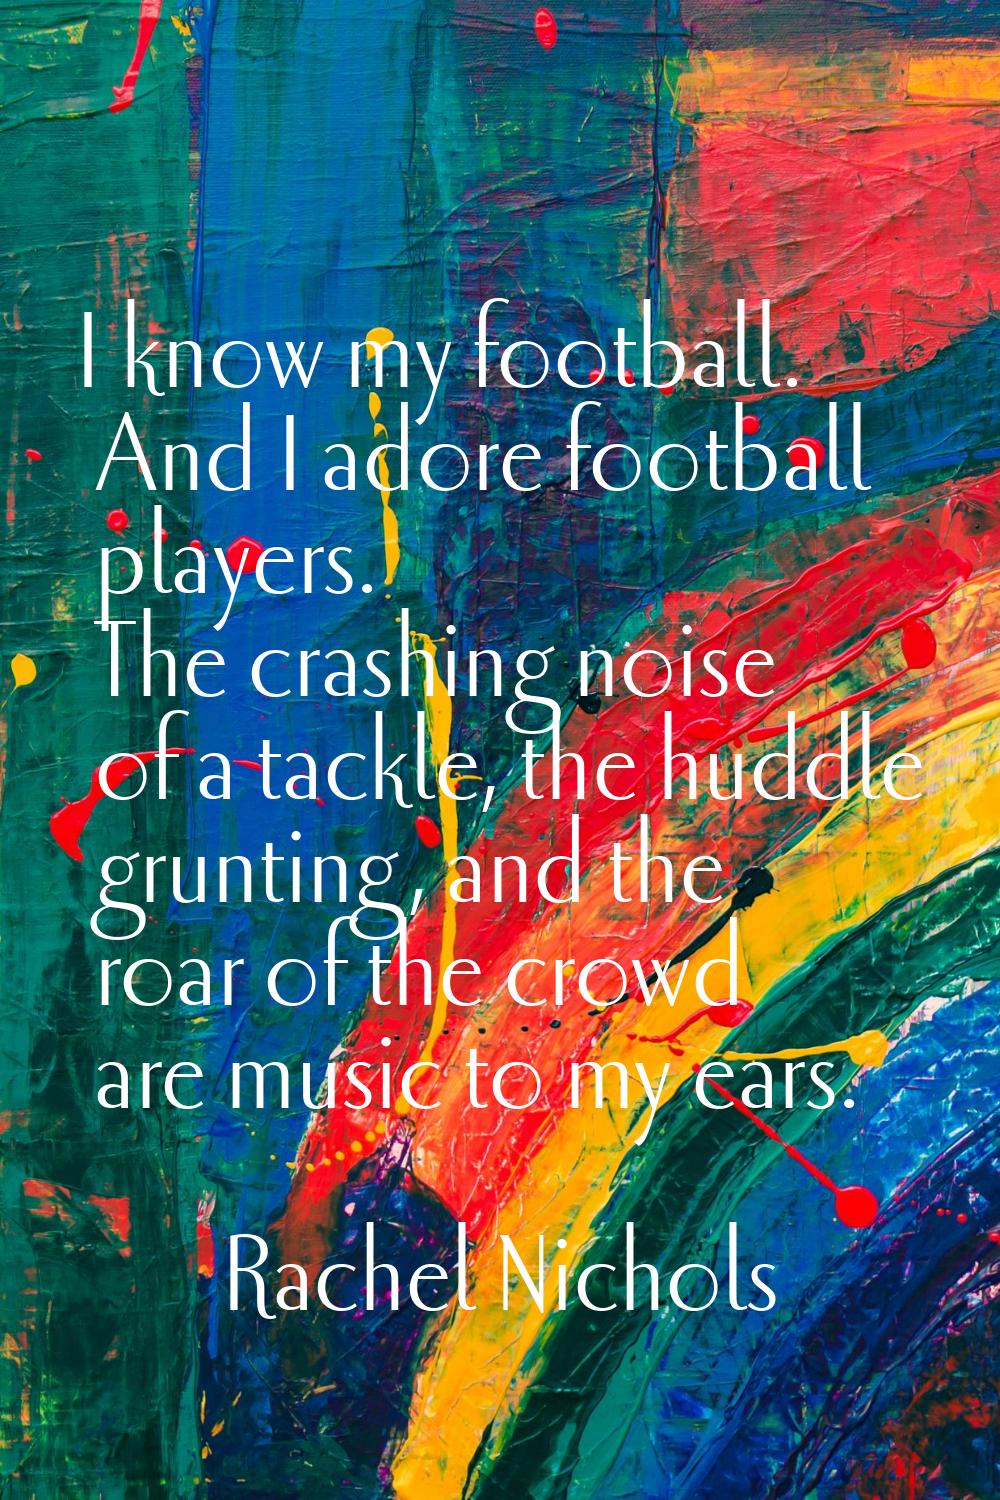 I know my football. And I adore football players. The crashing noise of a tackle, the huddle grunti